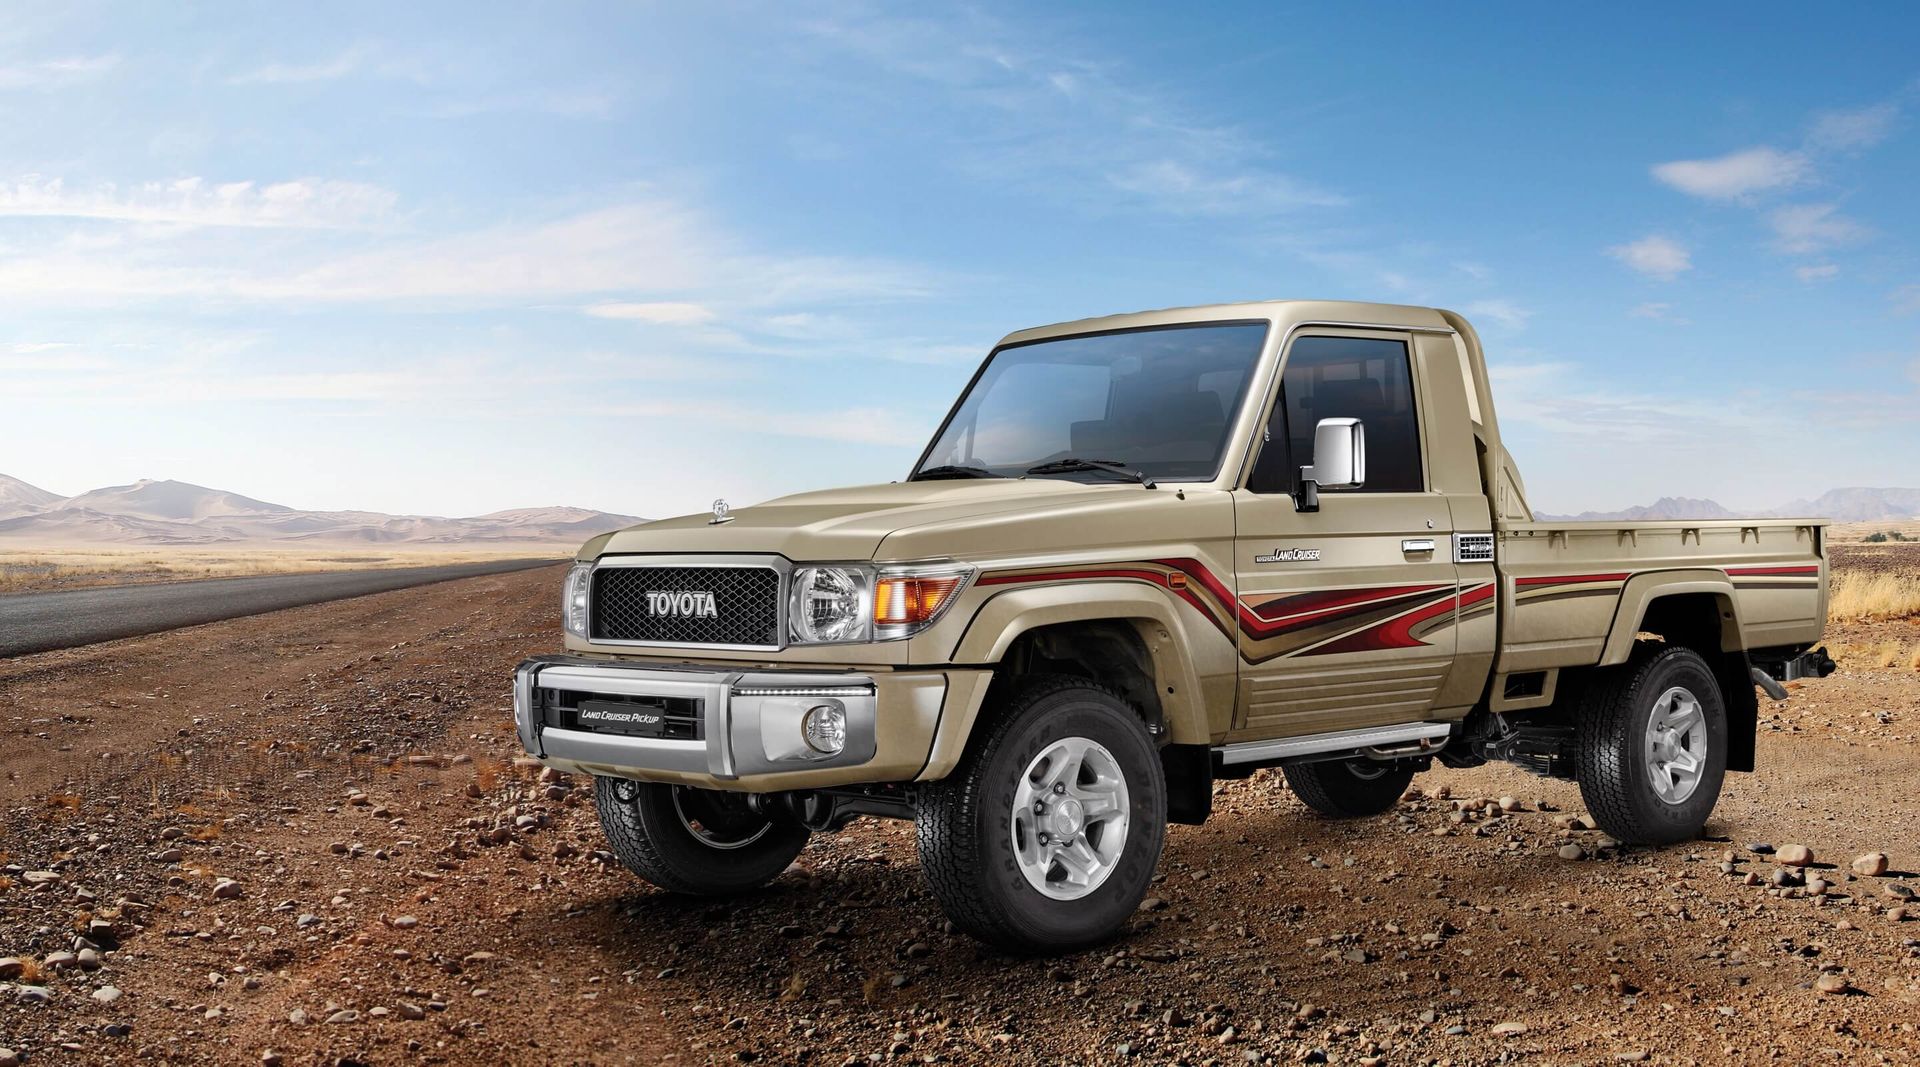 The Versatility and Power of the Toyota Land Cruiser Pickup